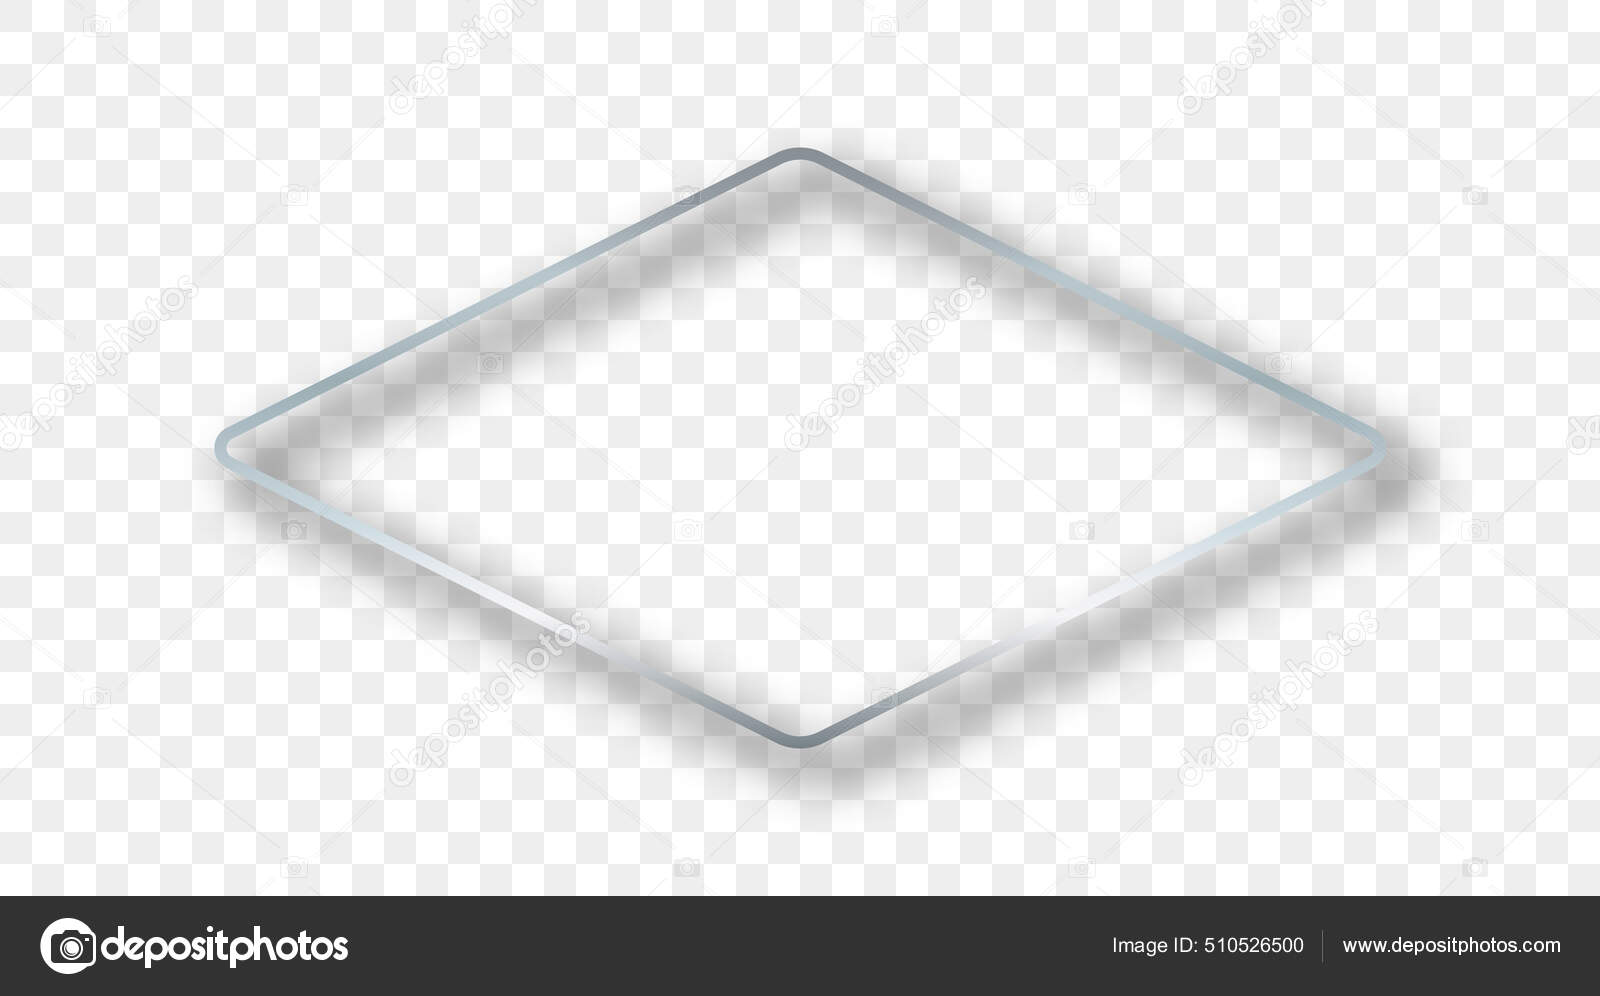 Glossy metal industrial plate in round shape Vector Image